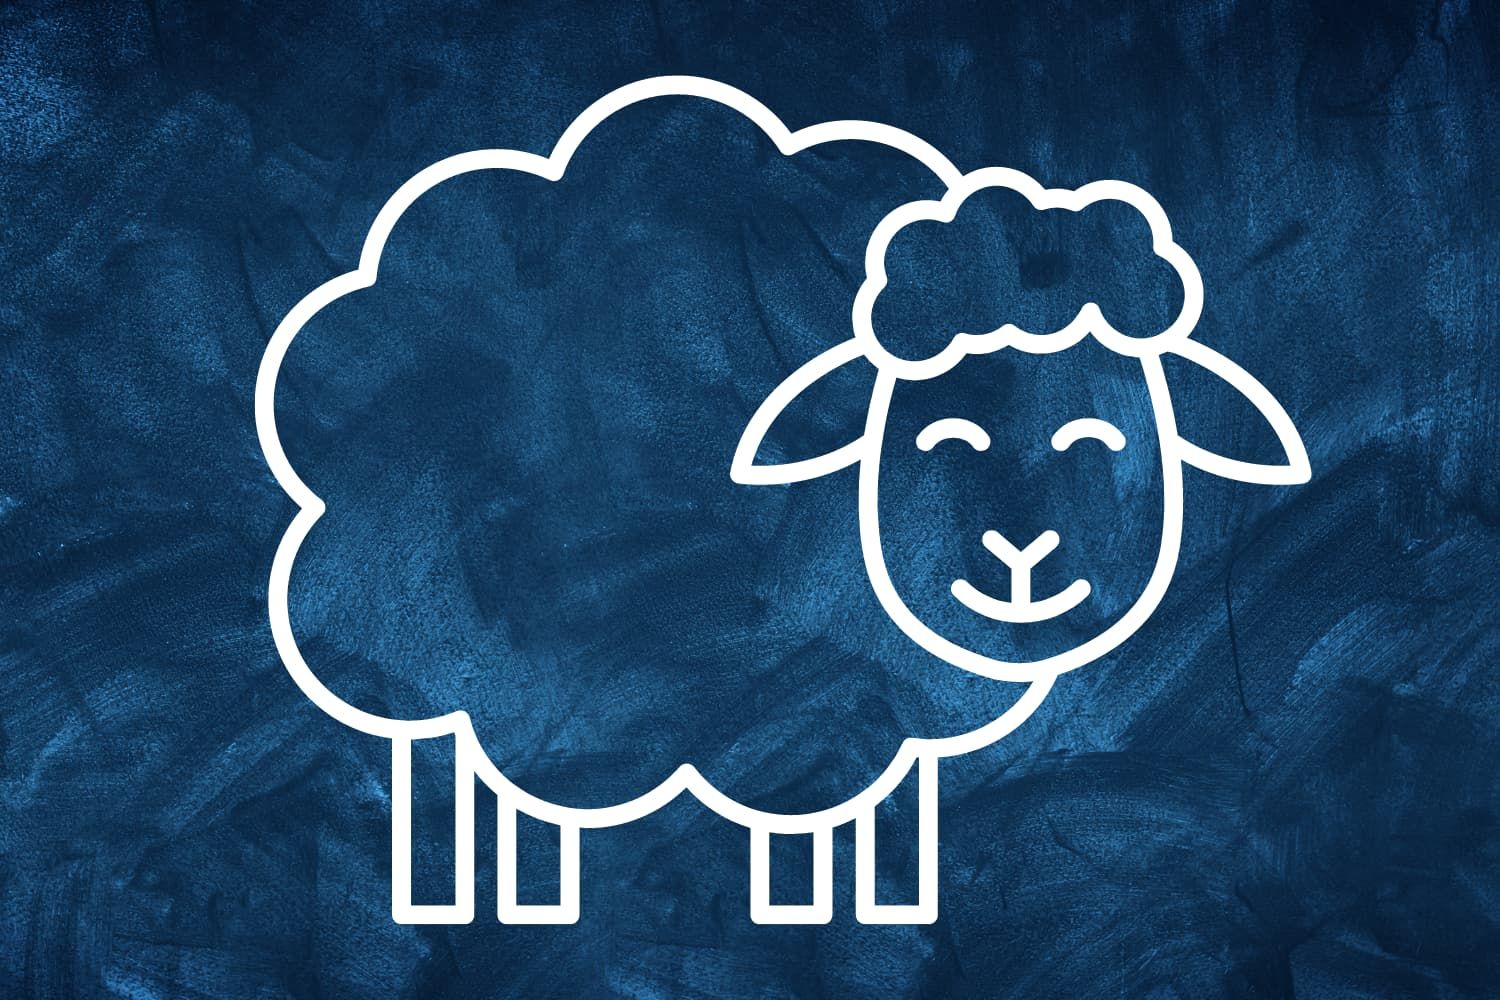 Craft%20-%20NT%20Parable%20of%20the%20lost%20sheep%20-%20Create%20a%20sheep-ea90aa6b The lost sheep